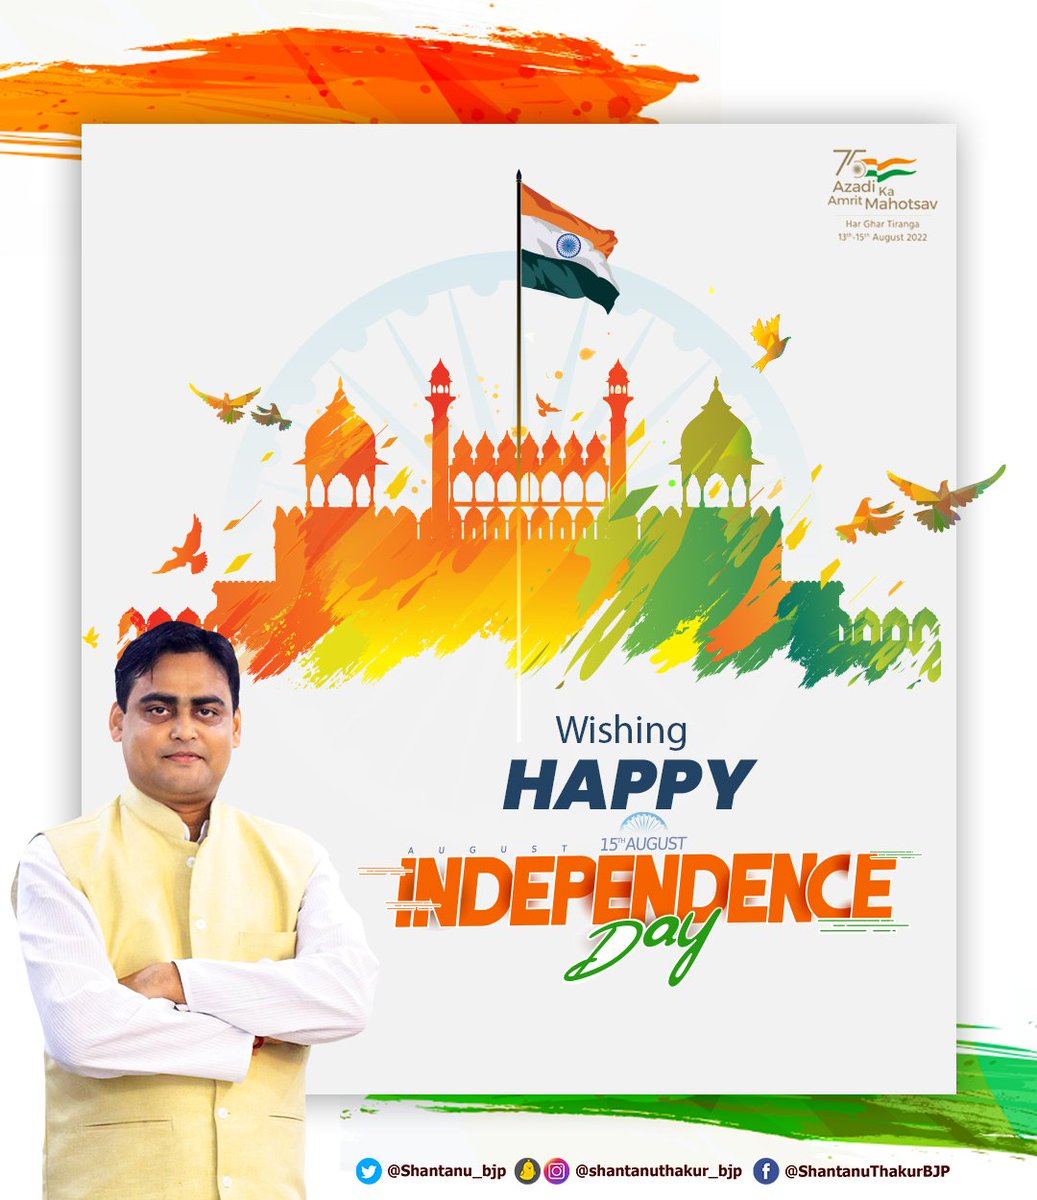 Wishing Happy Independence Day🇮🇳.

Lets hoist the Indian National Flag🇮🇳 at our home & be part of #HarGharTiranga🇮🇳 Movement.

May we all protect Maa Bharati's🇮🇳 integrity & unity and prosper happiness forever. 

#BharatMataKiJai
#AazadiKaAmritMahotsav
#IndiaAt75